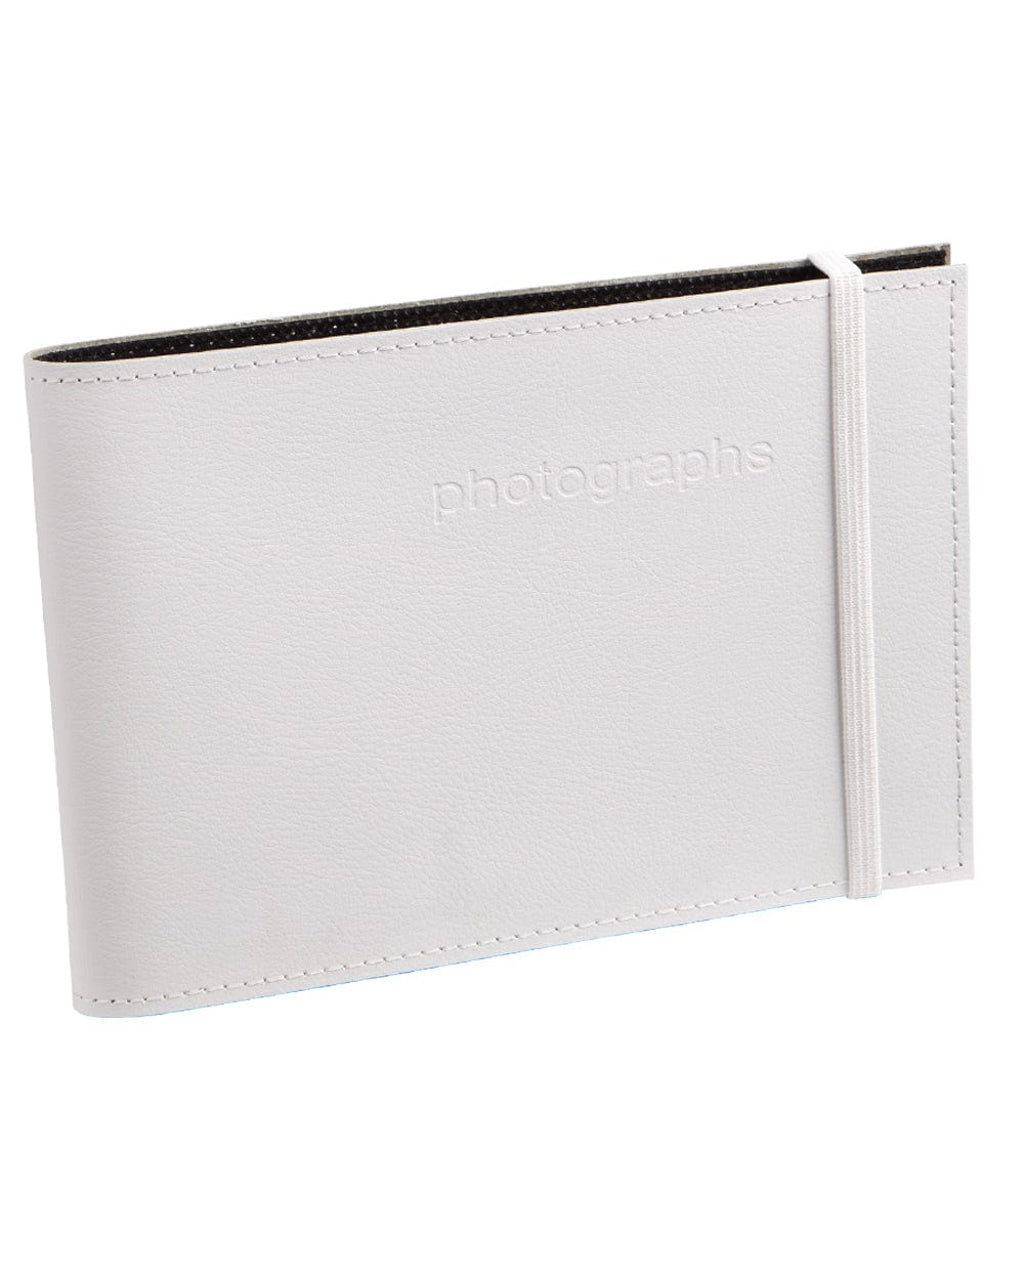 Citi Leather White Medium 5x7in Slip-in Bragbook Photo Album from our Photo Albums collection by Profile Products Australia